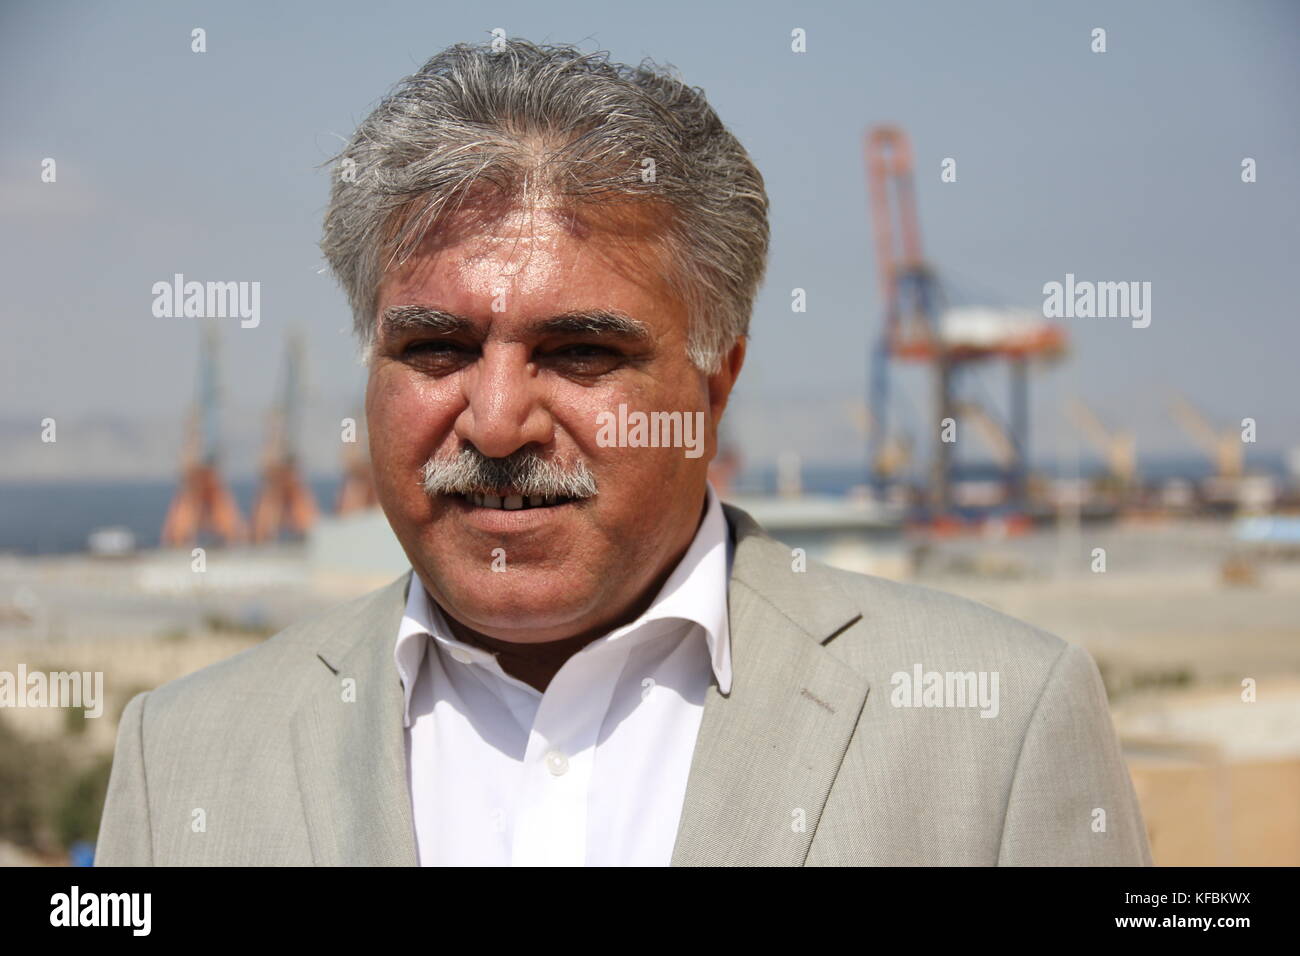 Dostain Jamaldini, Director of the Gwadar Port Development Authority standing in his office's balcony in Gwadar, Baluchsitan, in the southernmost tip of Pakistan, 04 October 2017. From the balcony there is a clear view to what is supposed to one day become a mega port. Heavy-duty cranes for loading and unloading of container ships can be seen in the background. According to Jamaldini Gwadar is to become the largest shipping port of South Asia by 2022 and one of the largest in the world in 30 years' time. Gwadar is a hub of the planned so-called 'China-Pakistan Economic Corridor', or CPEC for s Stock Photo